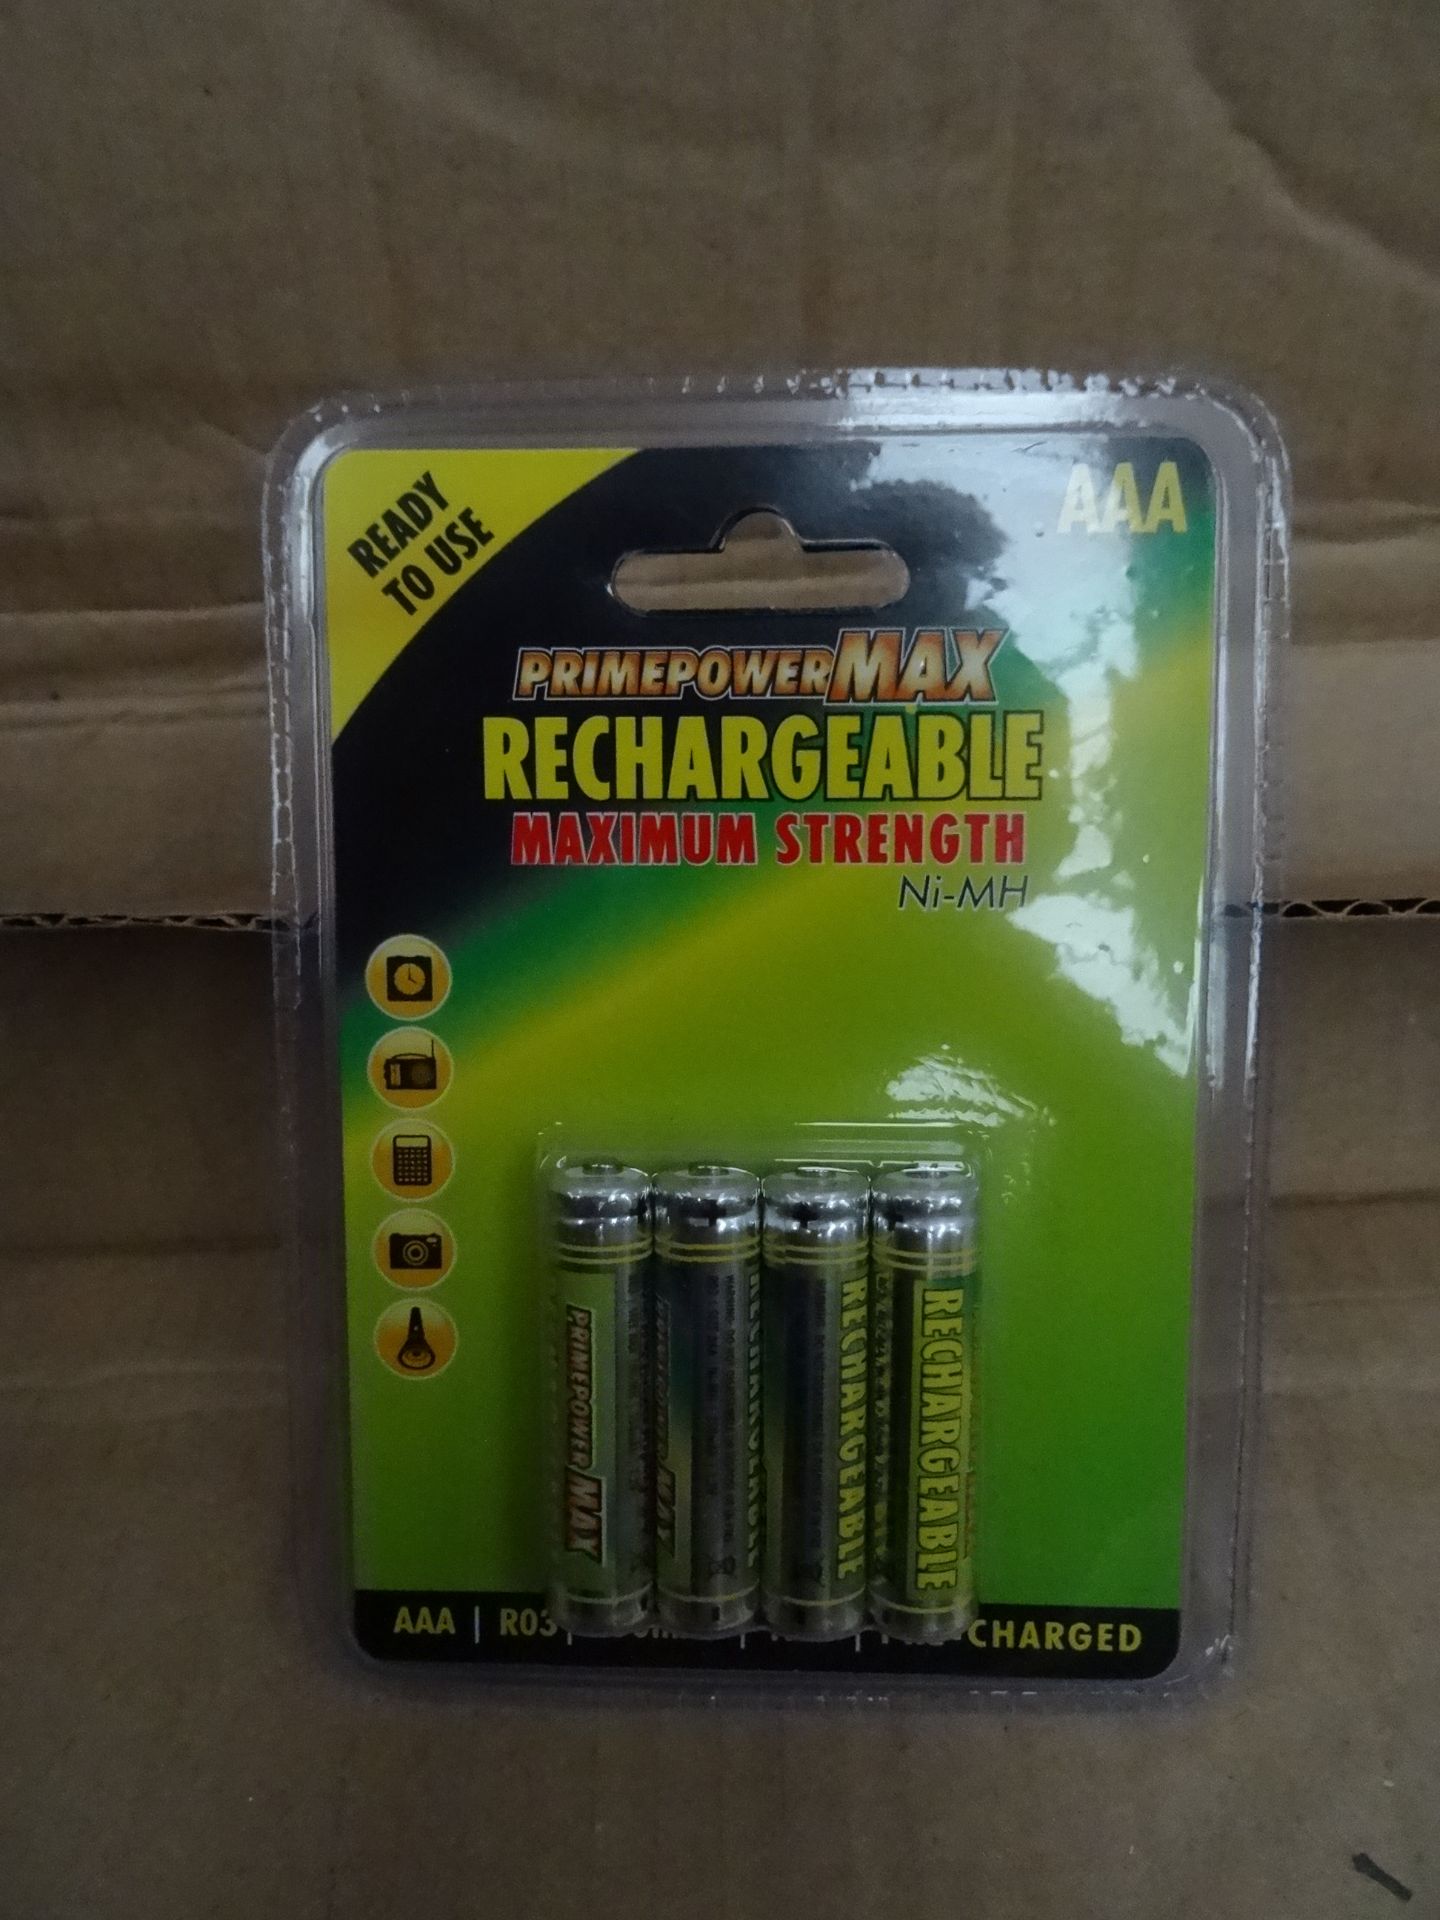 16 x Packs of 4 Prime Power MAX Rechargeable Maximum Strength AAA Size Batteries! Brand new and